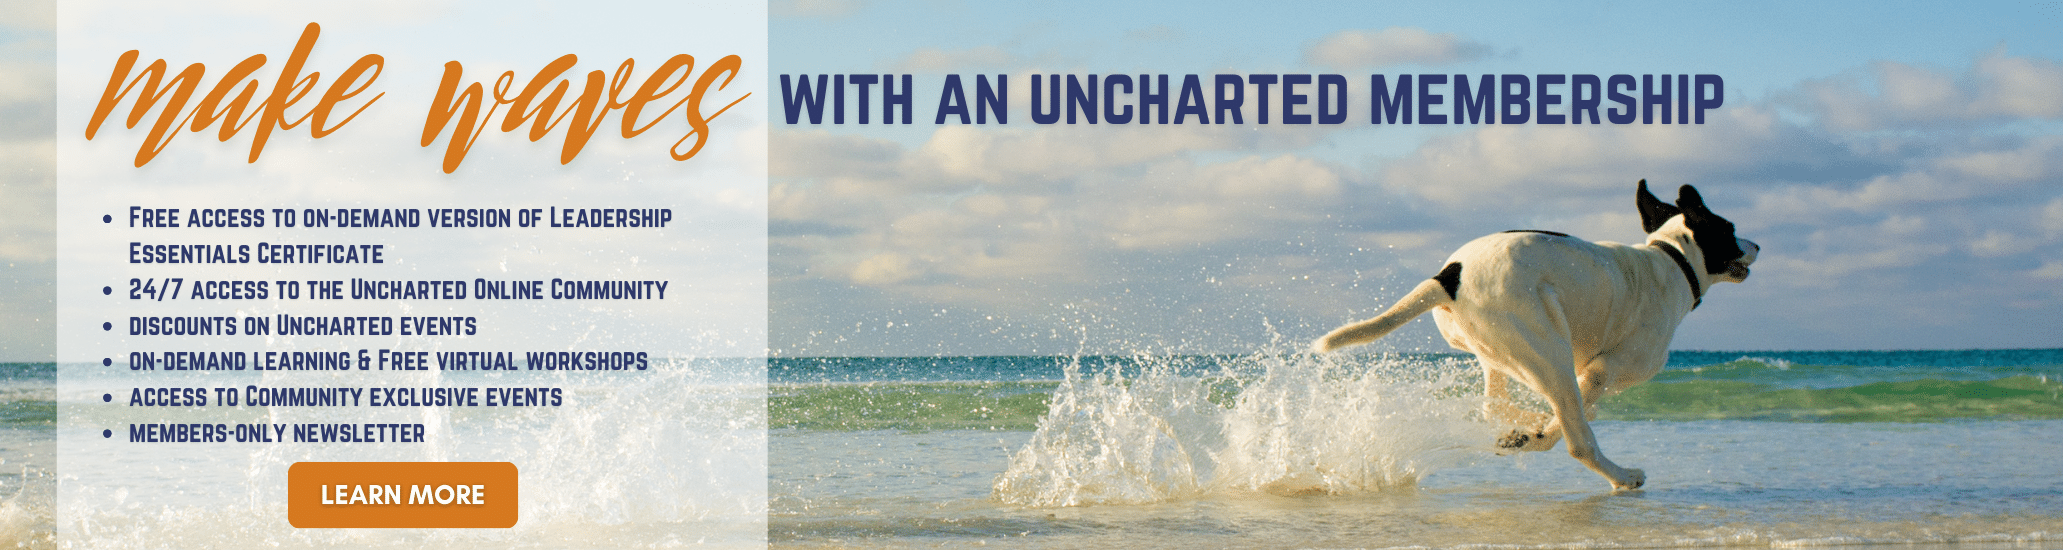 Make waves with an Uncharted Membership banner